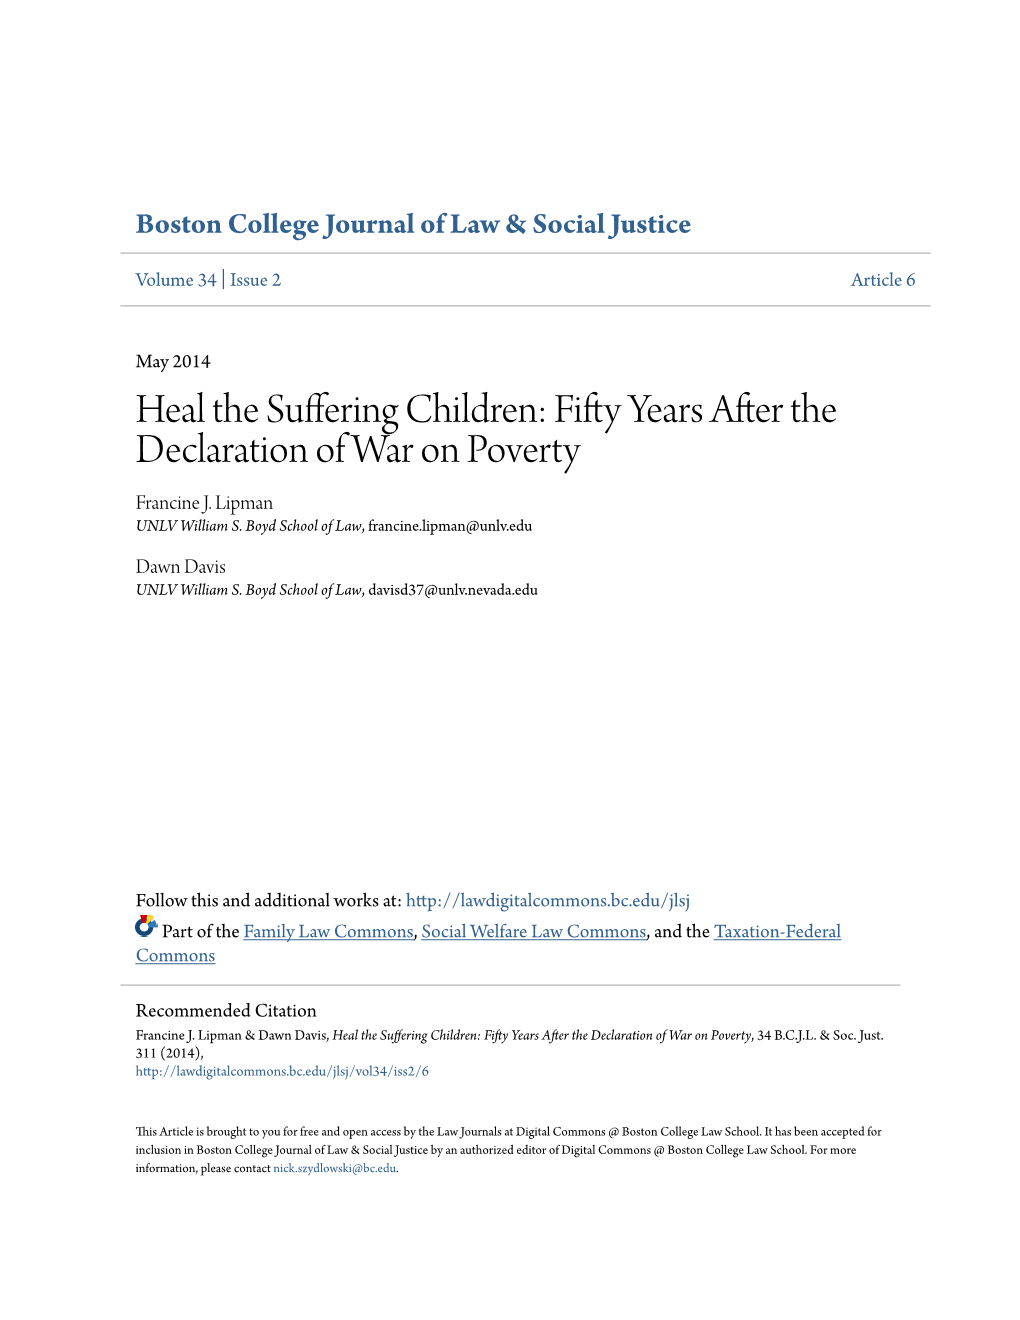 Heal the Suffering Children: Fifty Years After the Declaration of War on Poverty Francine J